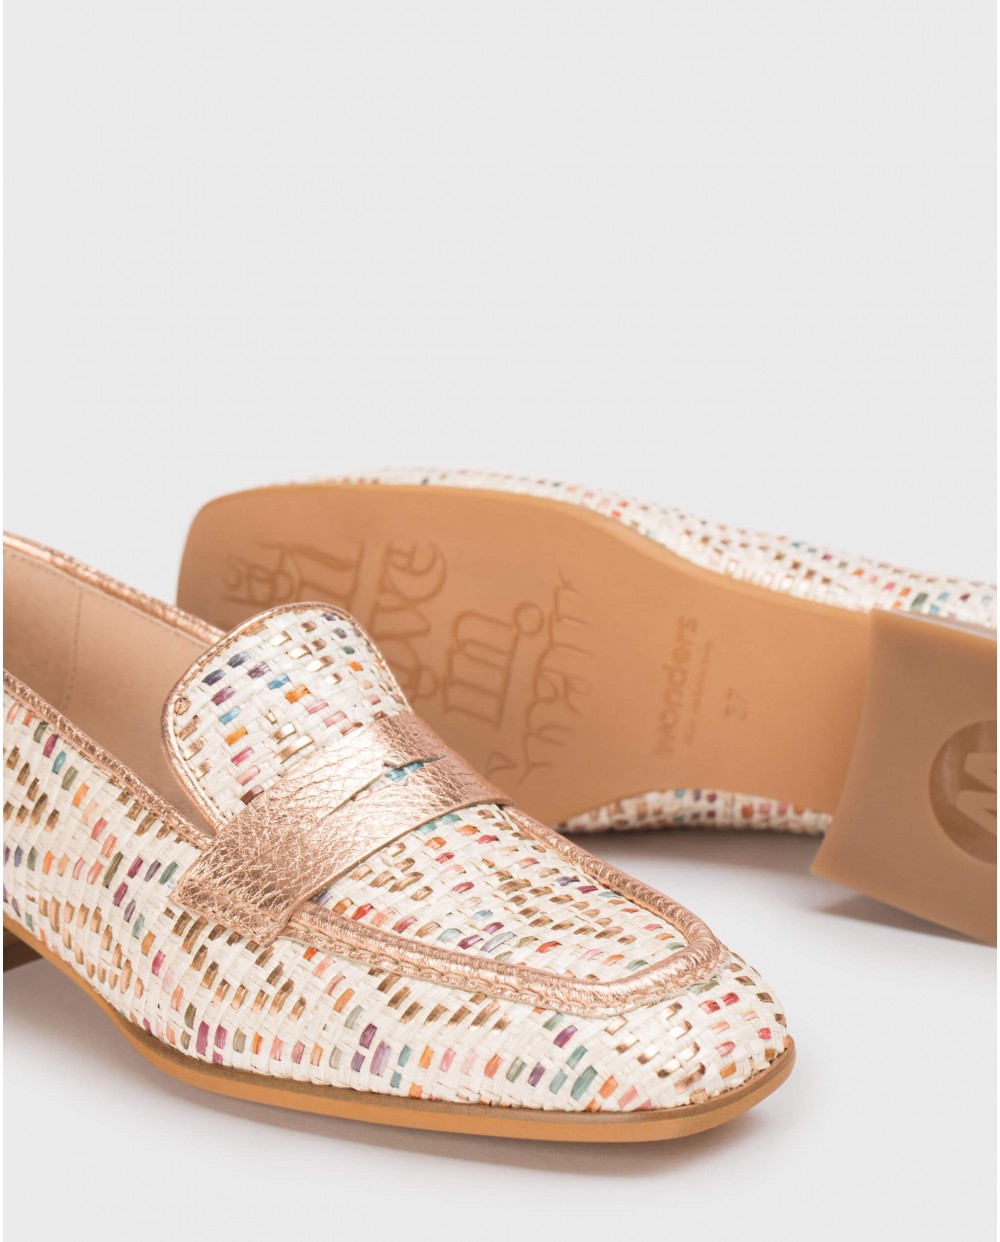 Wonders-Flat Shoes-Multicolored REESE Moccasin